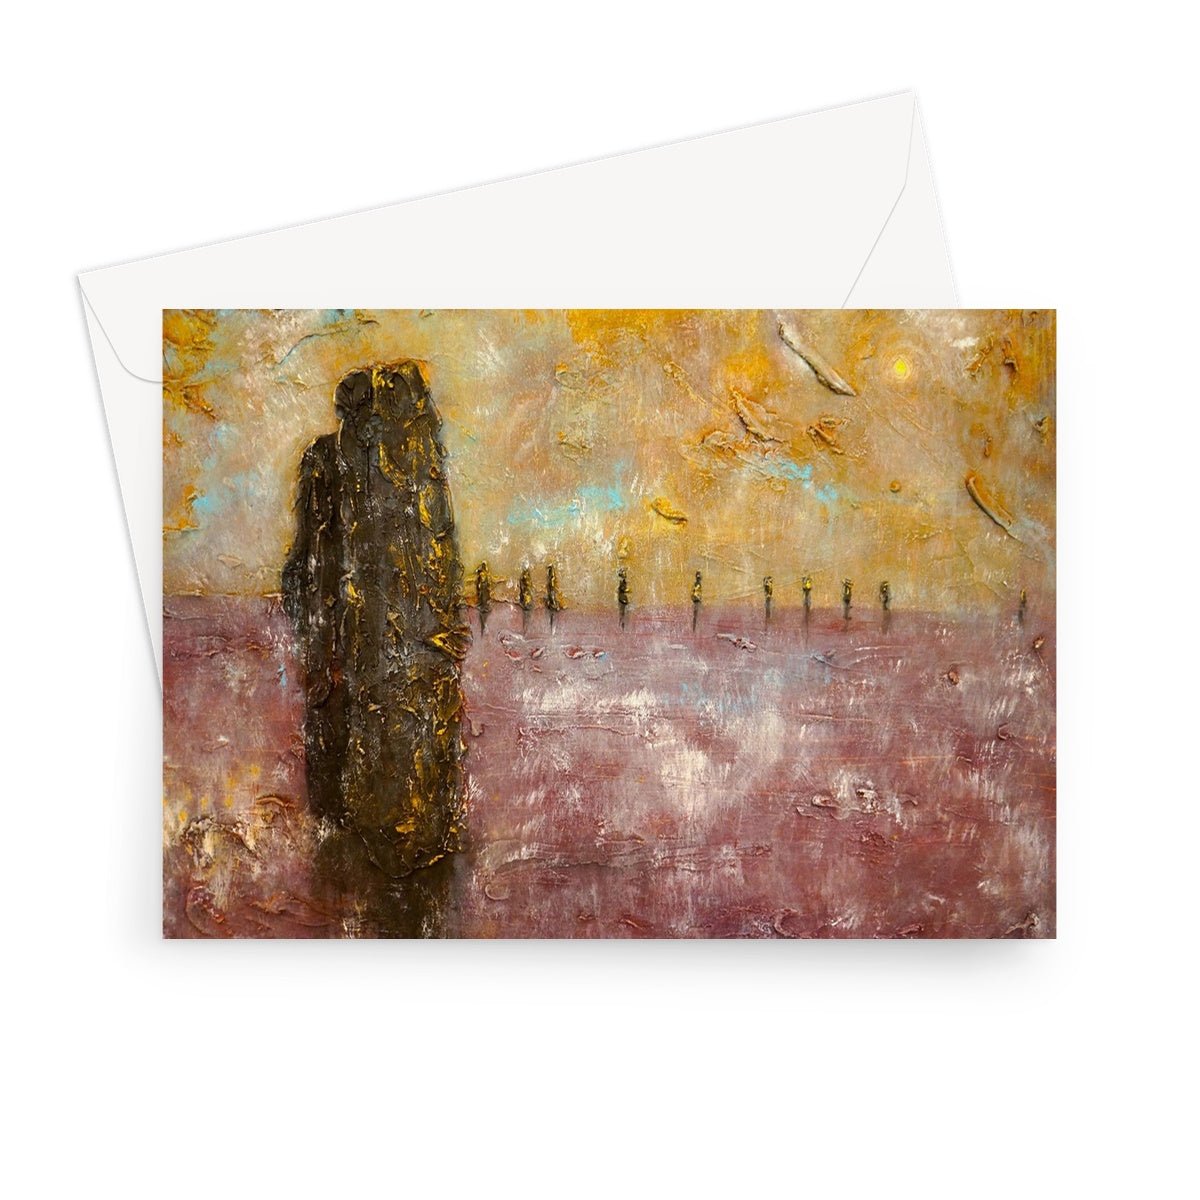 Bordgar Mist Orkney Art Gifts Greeting Card-Greetings Cards-Orkney Art Gallery-7"x5"-10 Cards-Paintings, Prints, Homeware, Art Gifts From Scotland By Scottish Artist Kevin Hunter